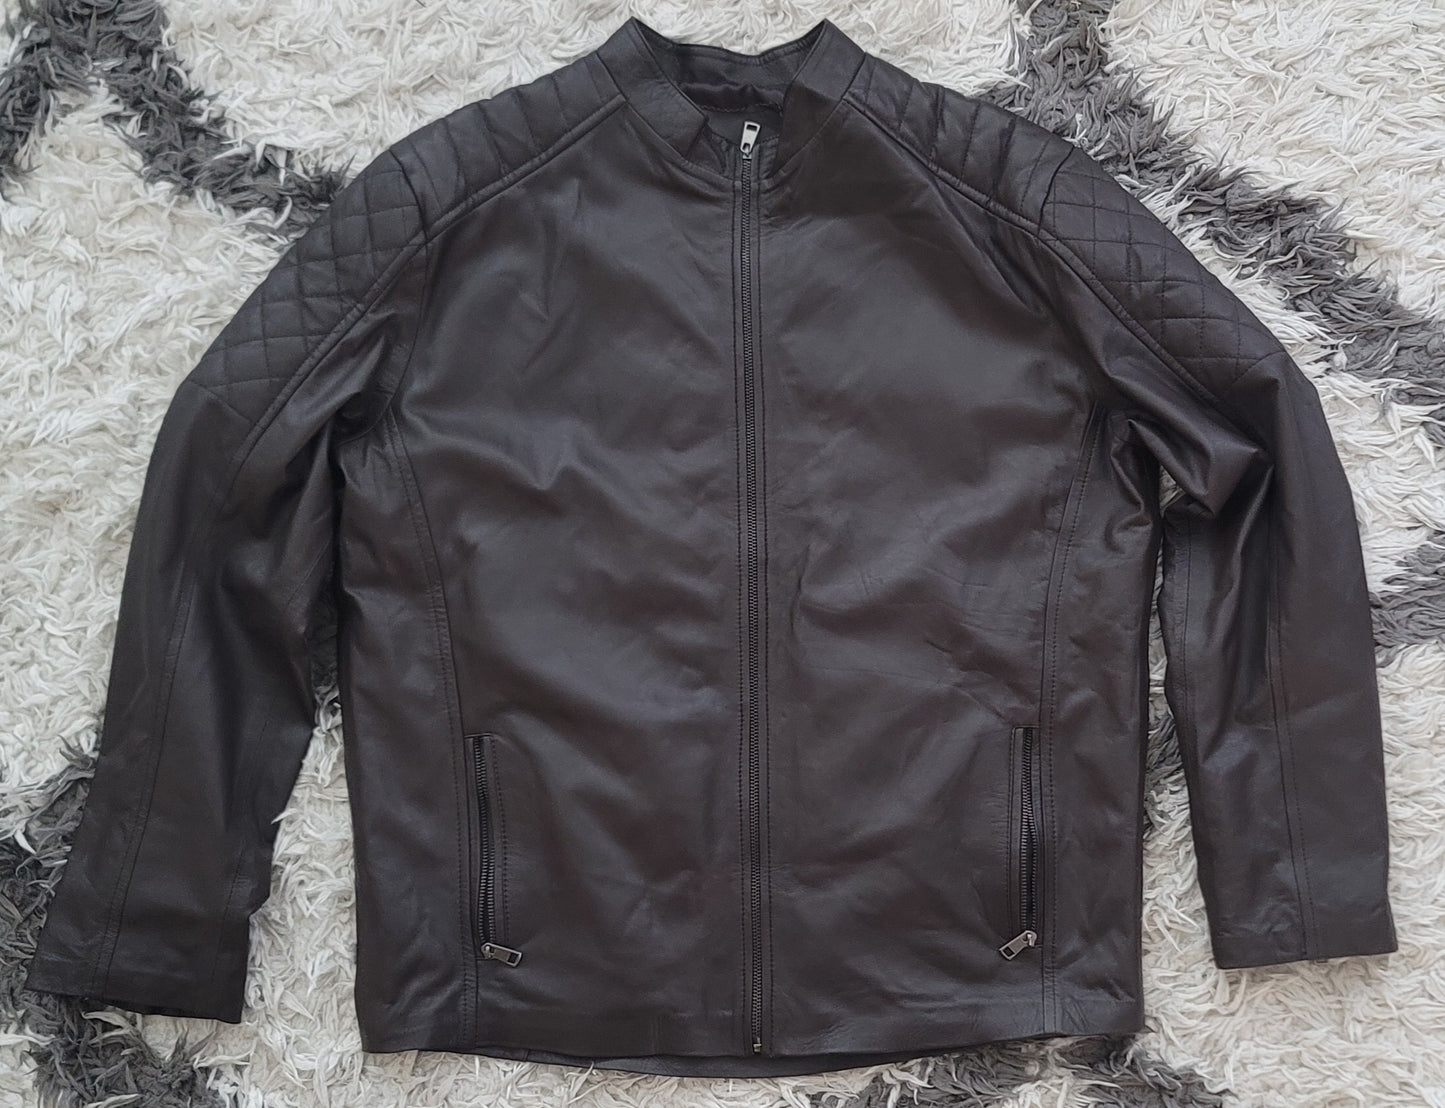 T-Man Brown Leather Jacket